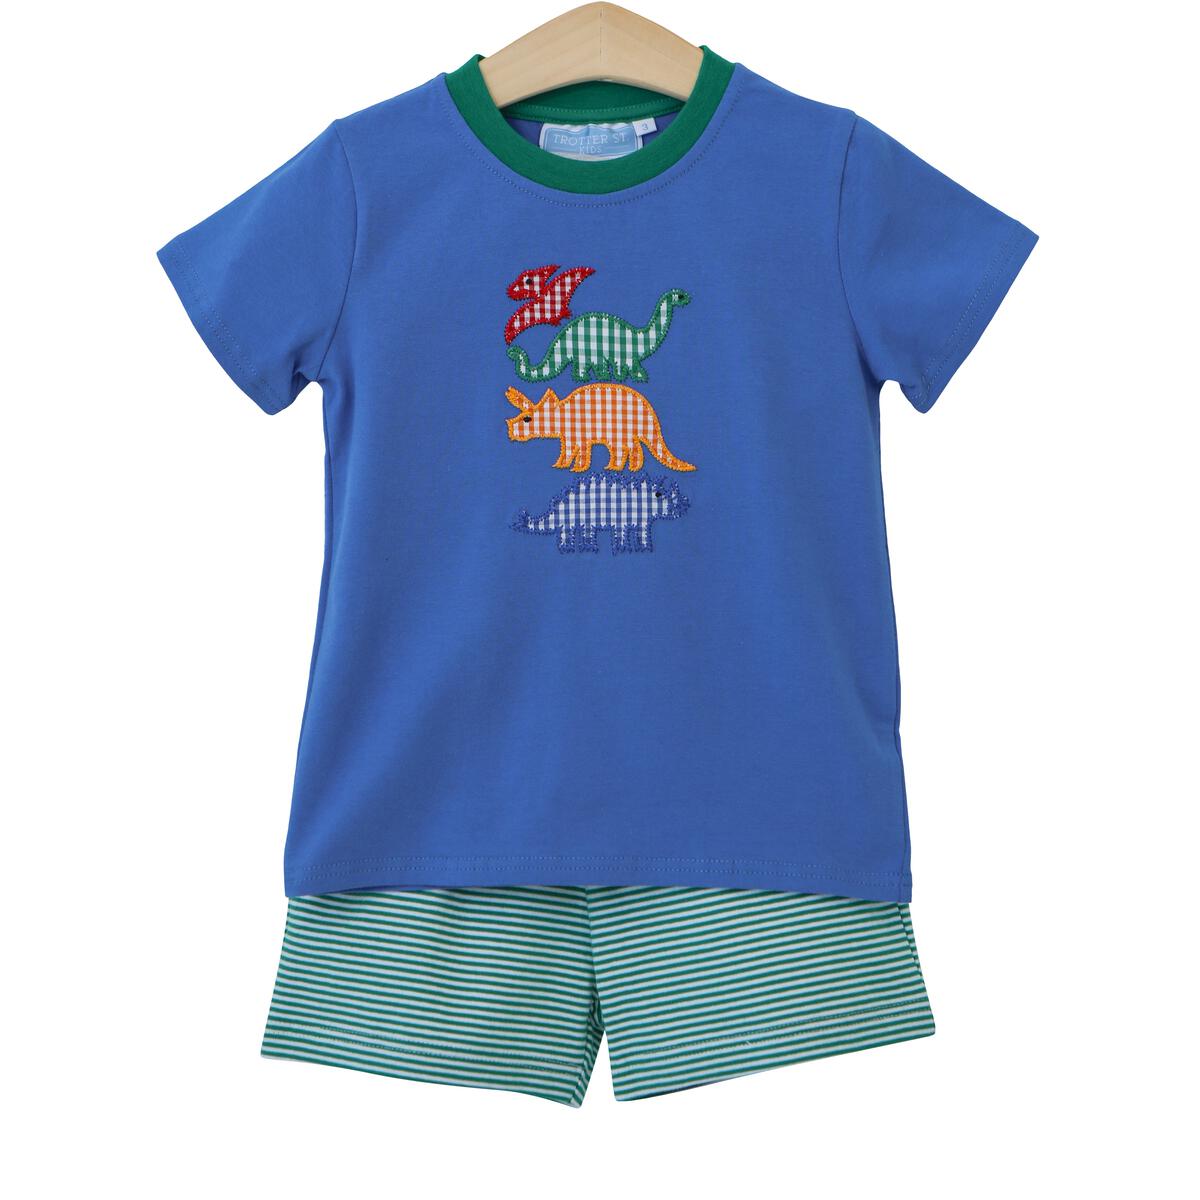 Blue knit top trimmed in dark green  with a 4 dinosaur applique and a matching green and white stripe knit short